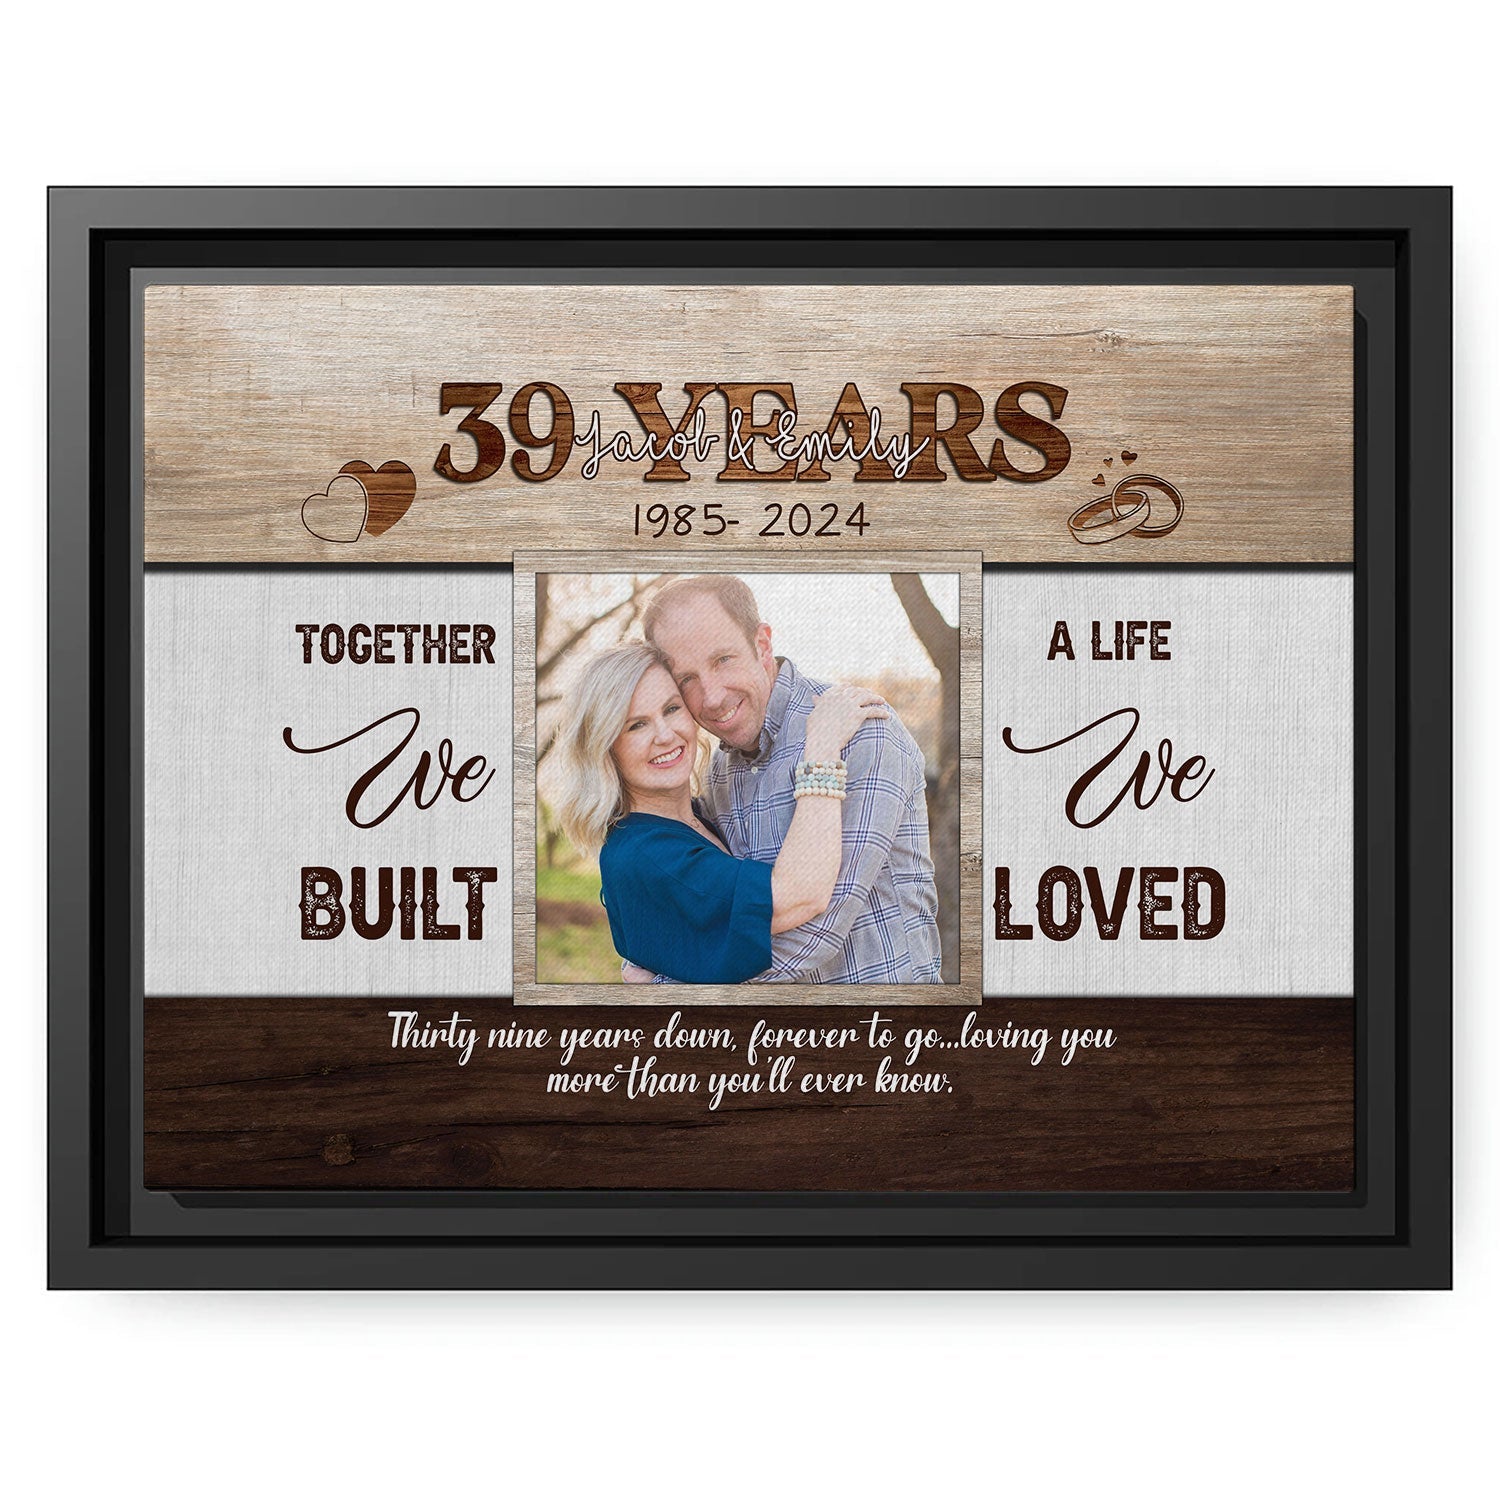 Thirty Nine Years Forever To Go - Personalized 39 Year Anniversary gift For Husband or Wife - Custom Canvas Print - MyMindfulGifts